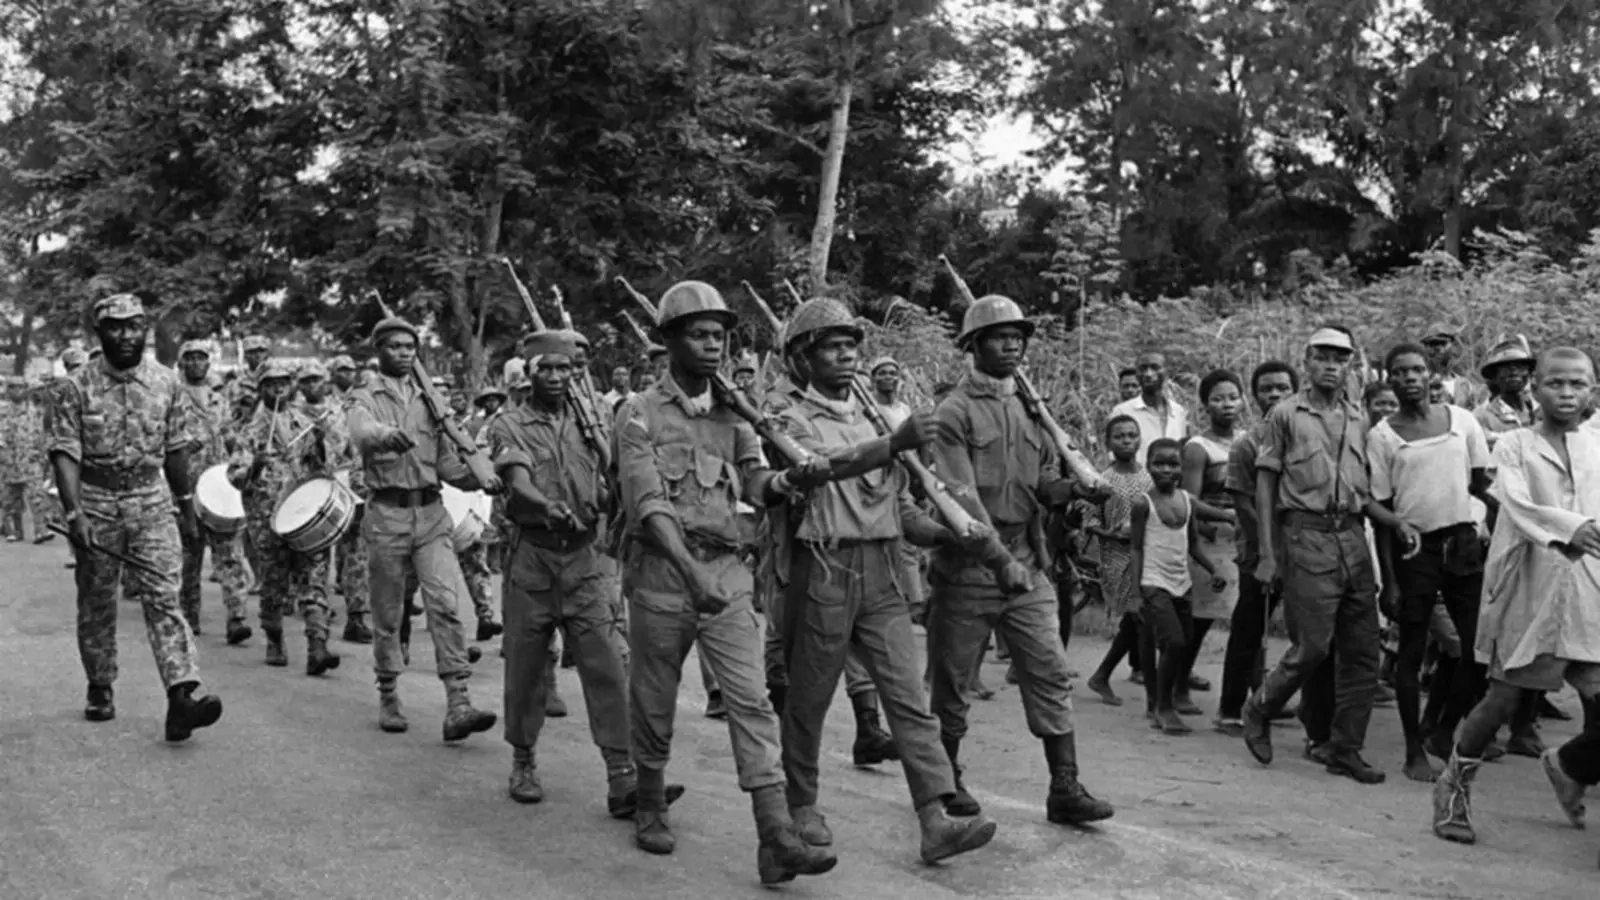 Soldiers fighting for the breakaway Republic of Biafra march during the Nigerian Civil War, fought from 1967 to 1970.